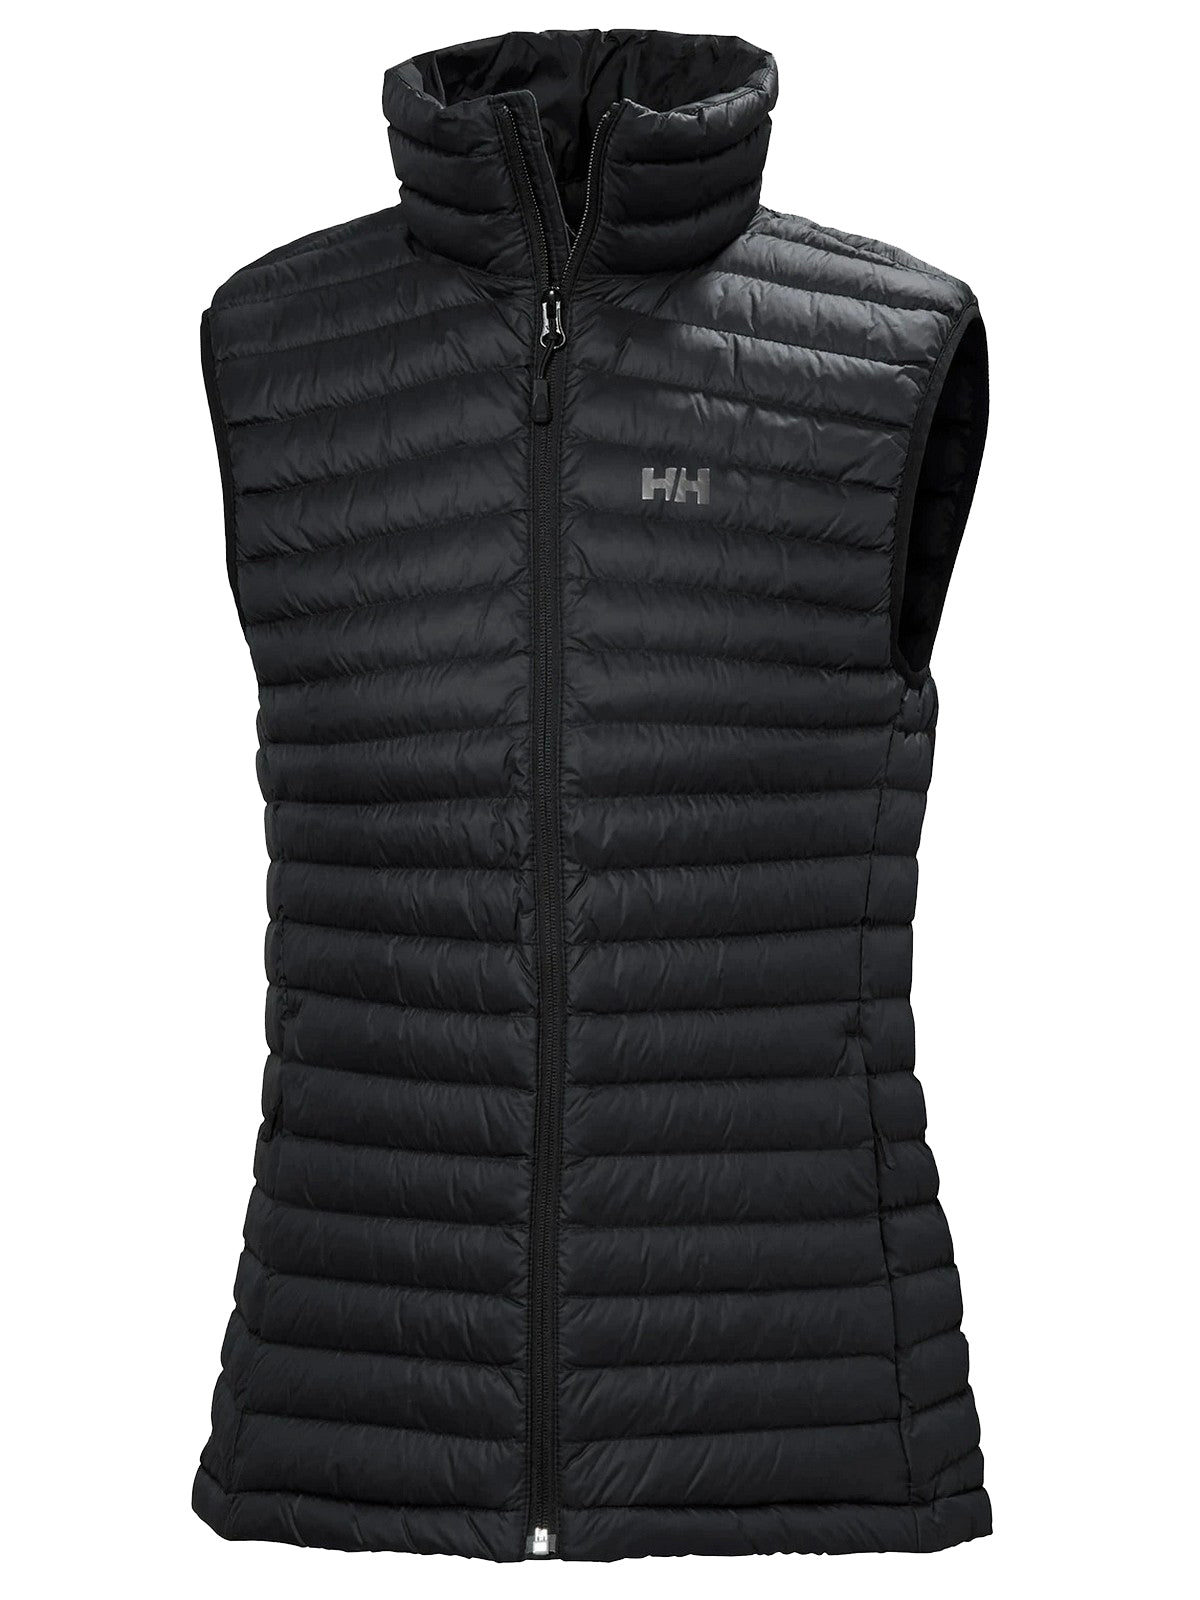 Women's Sirdal Insulated Vest